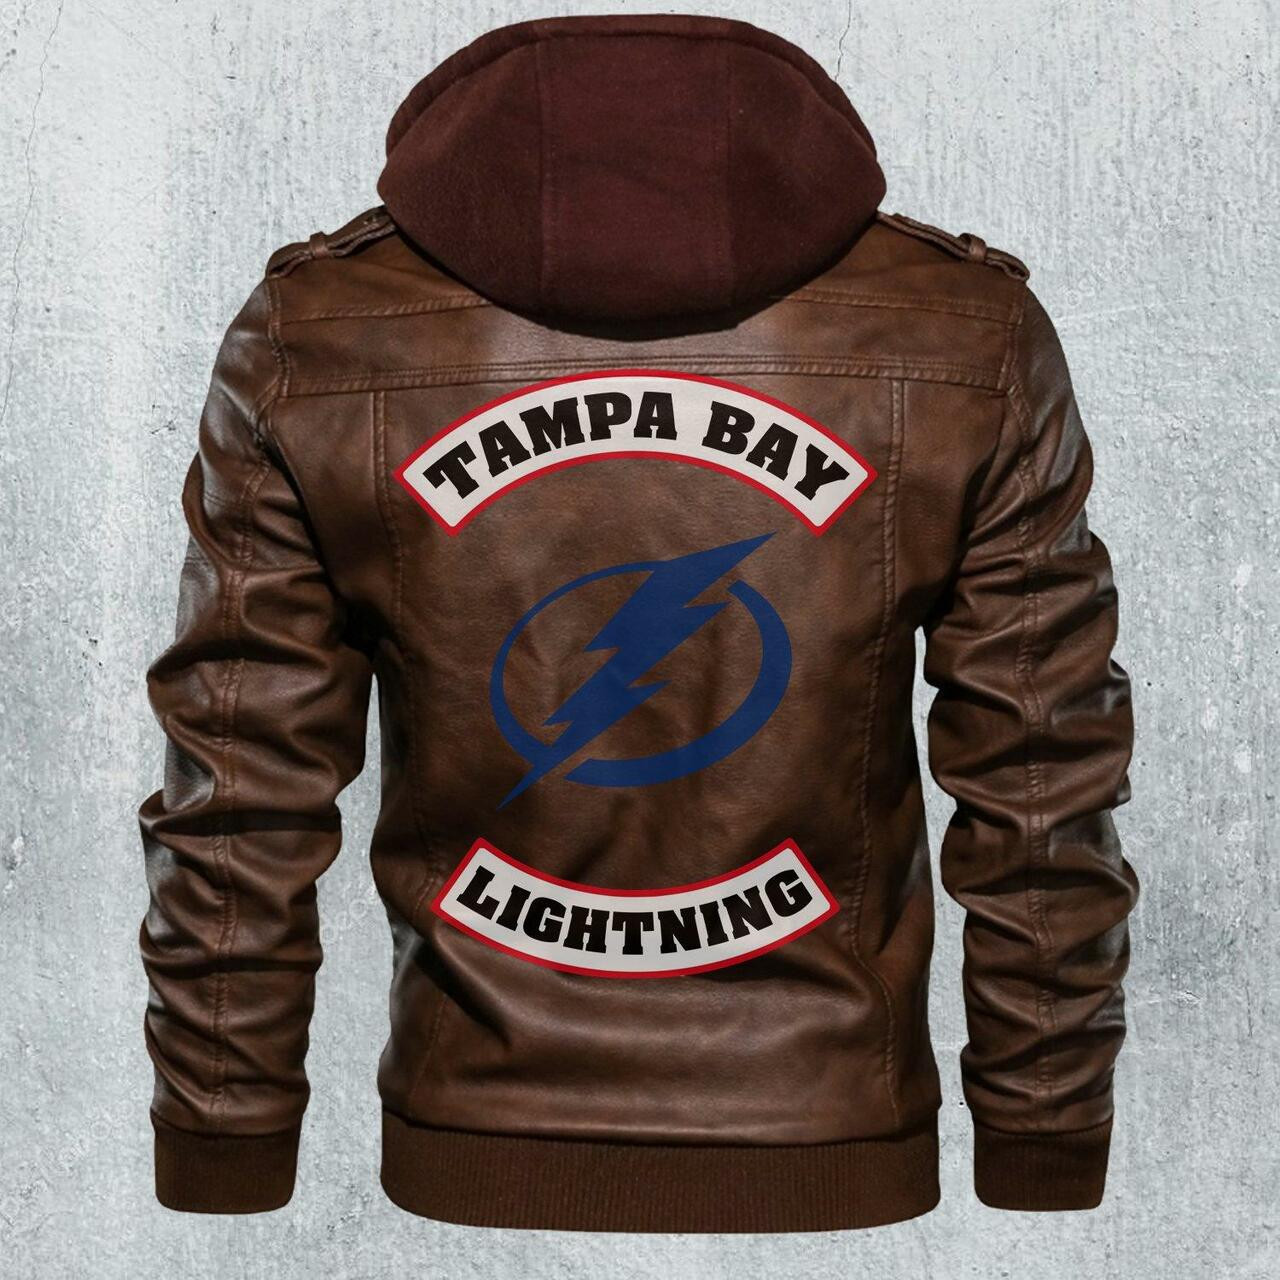 Check out our collection of the latest and greatest leather jacket 88